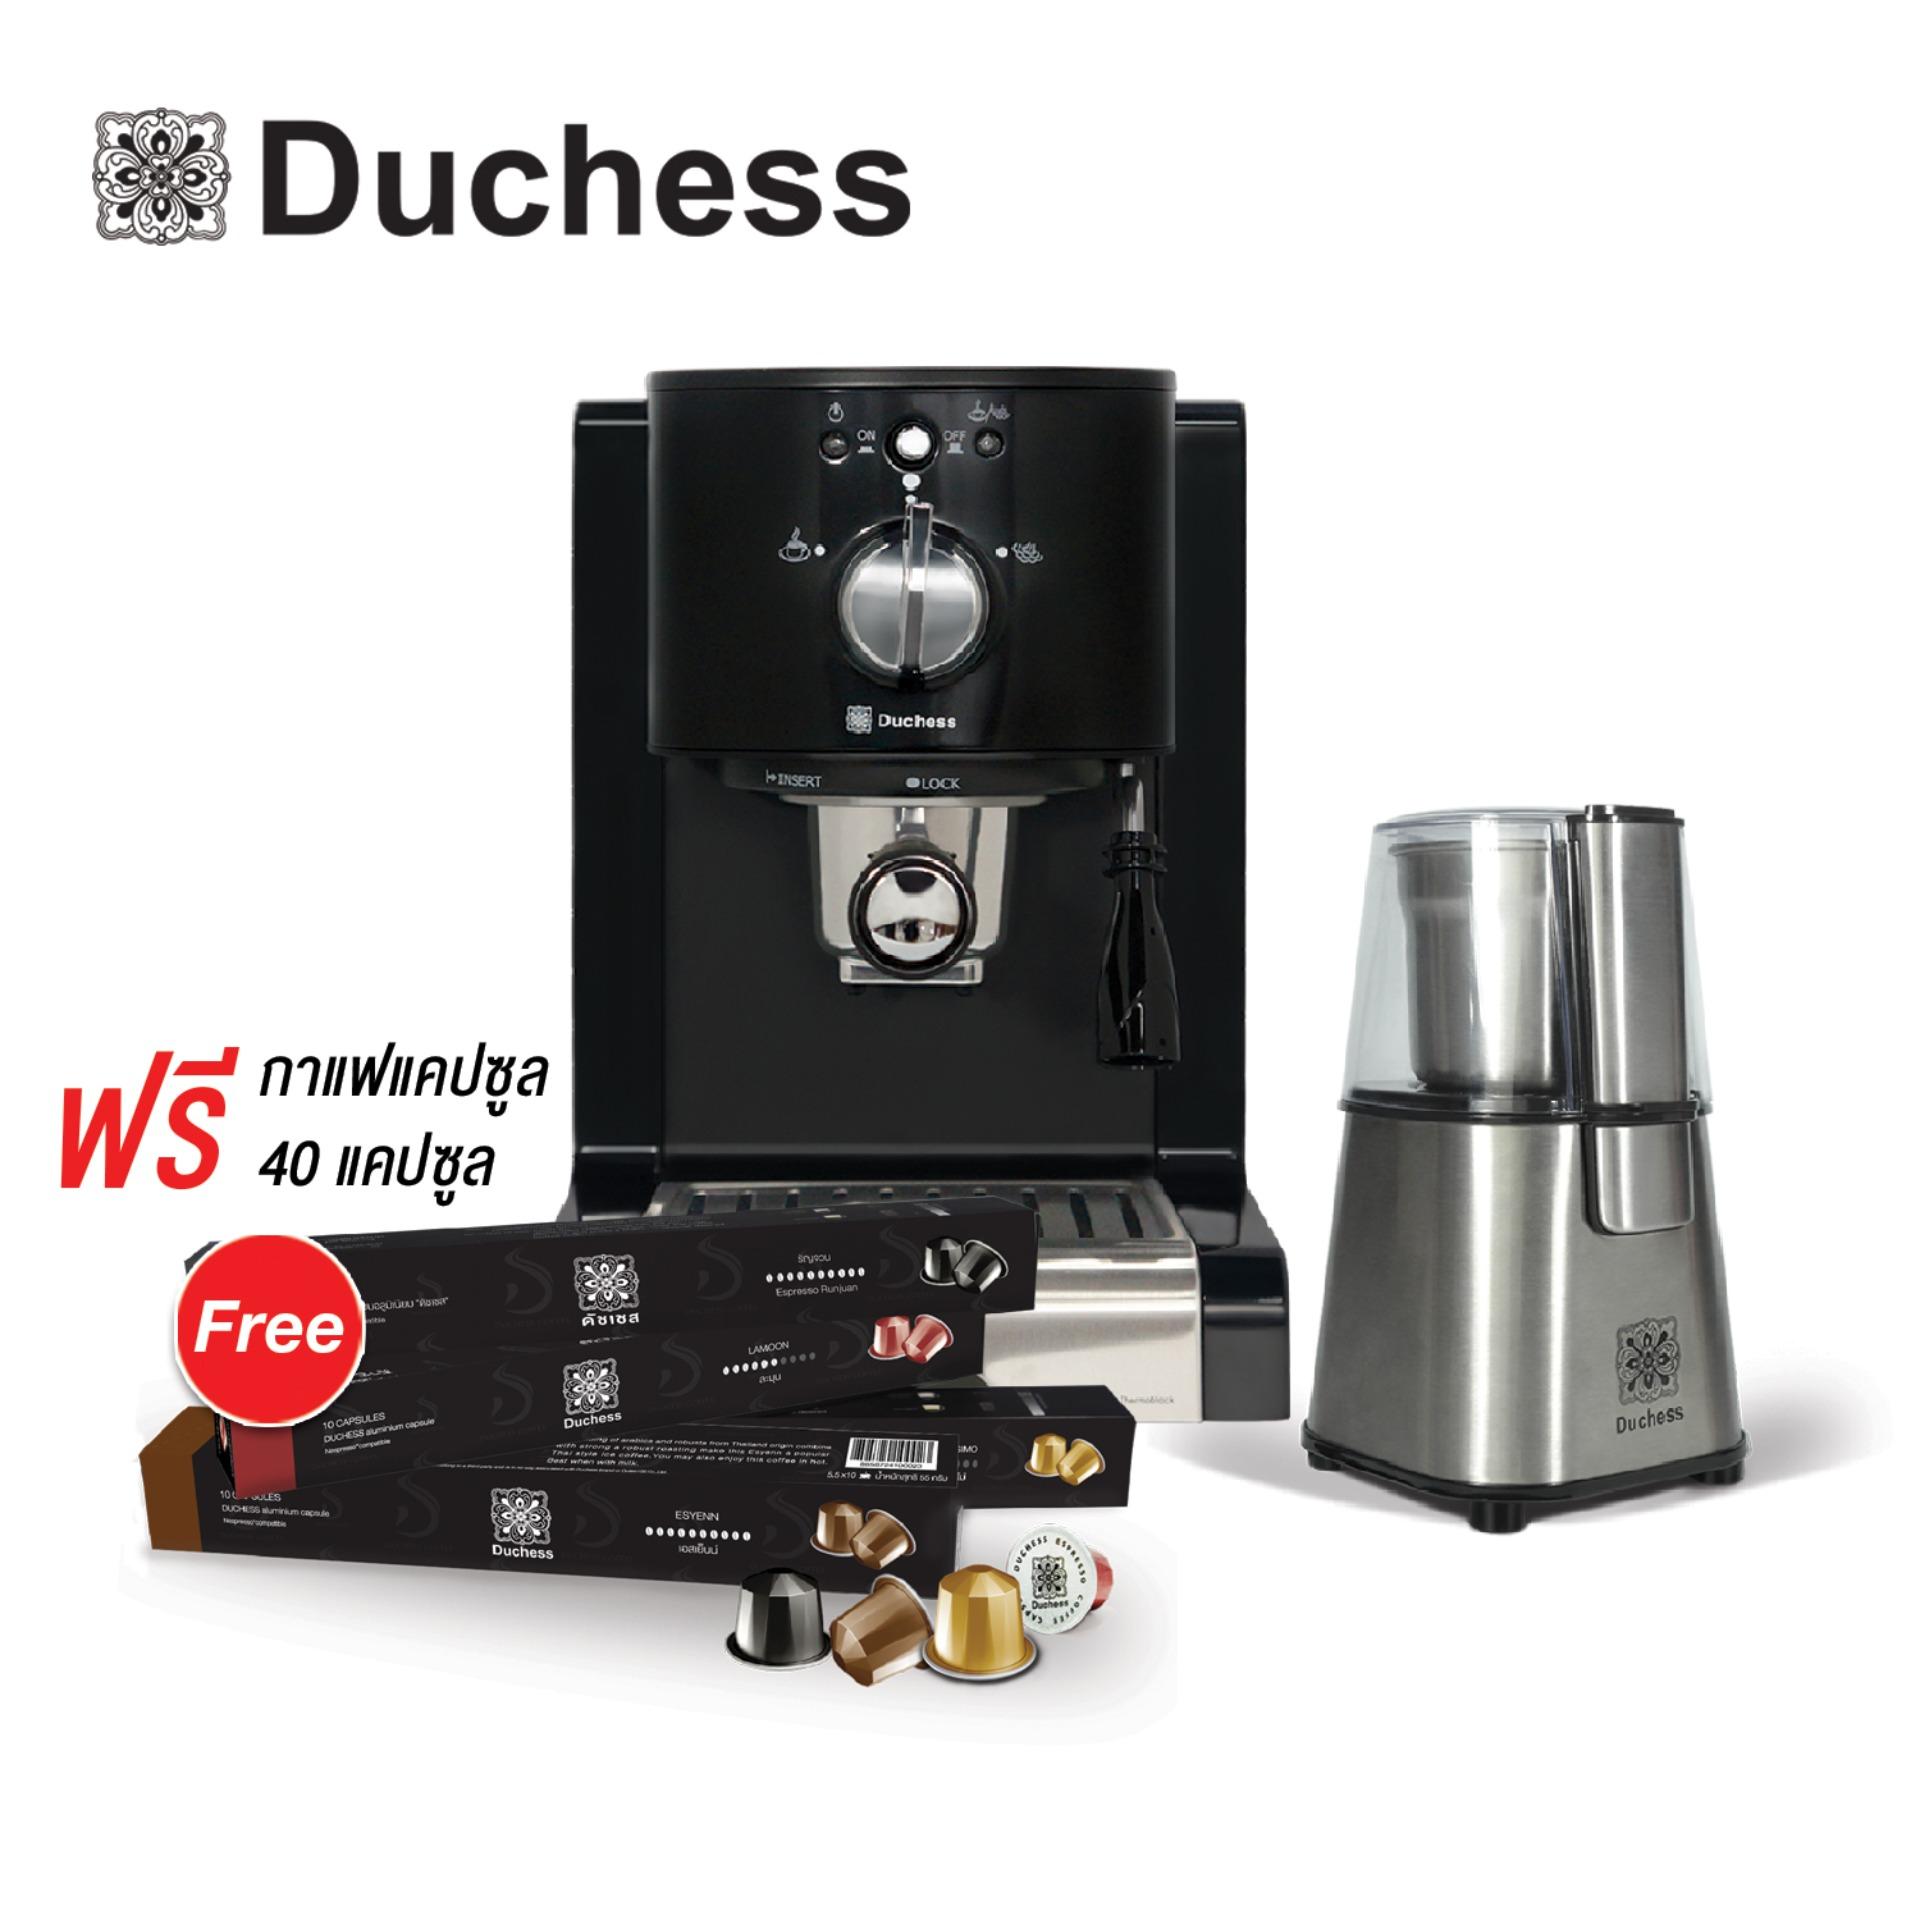 Image result for Duchess à¹à¸à¸£à¸·à¹à¸­à¸à¸à¸à¸à¸²à¹à¸à¸ªà¸ - à¸ªà¸µà¸à¸³ à¹à¸à¸¡à¸à¸²à¹à¸à¹à¸à¸à¸à¸¹à¸¥ 40 à¹à¸à¸à¸à¸¹à¸¥ - CM5300B#4